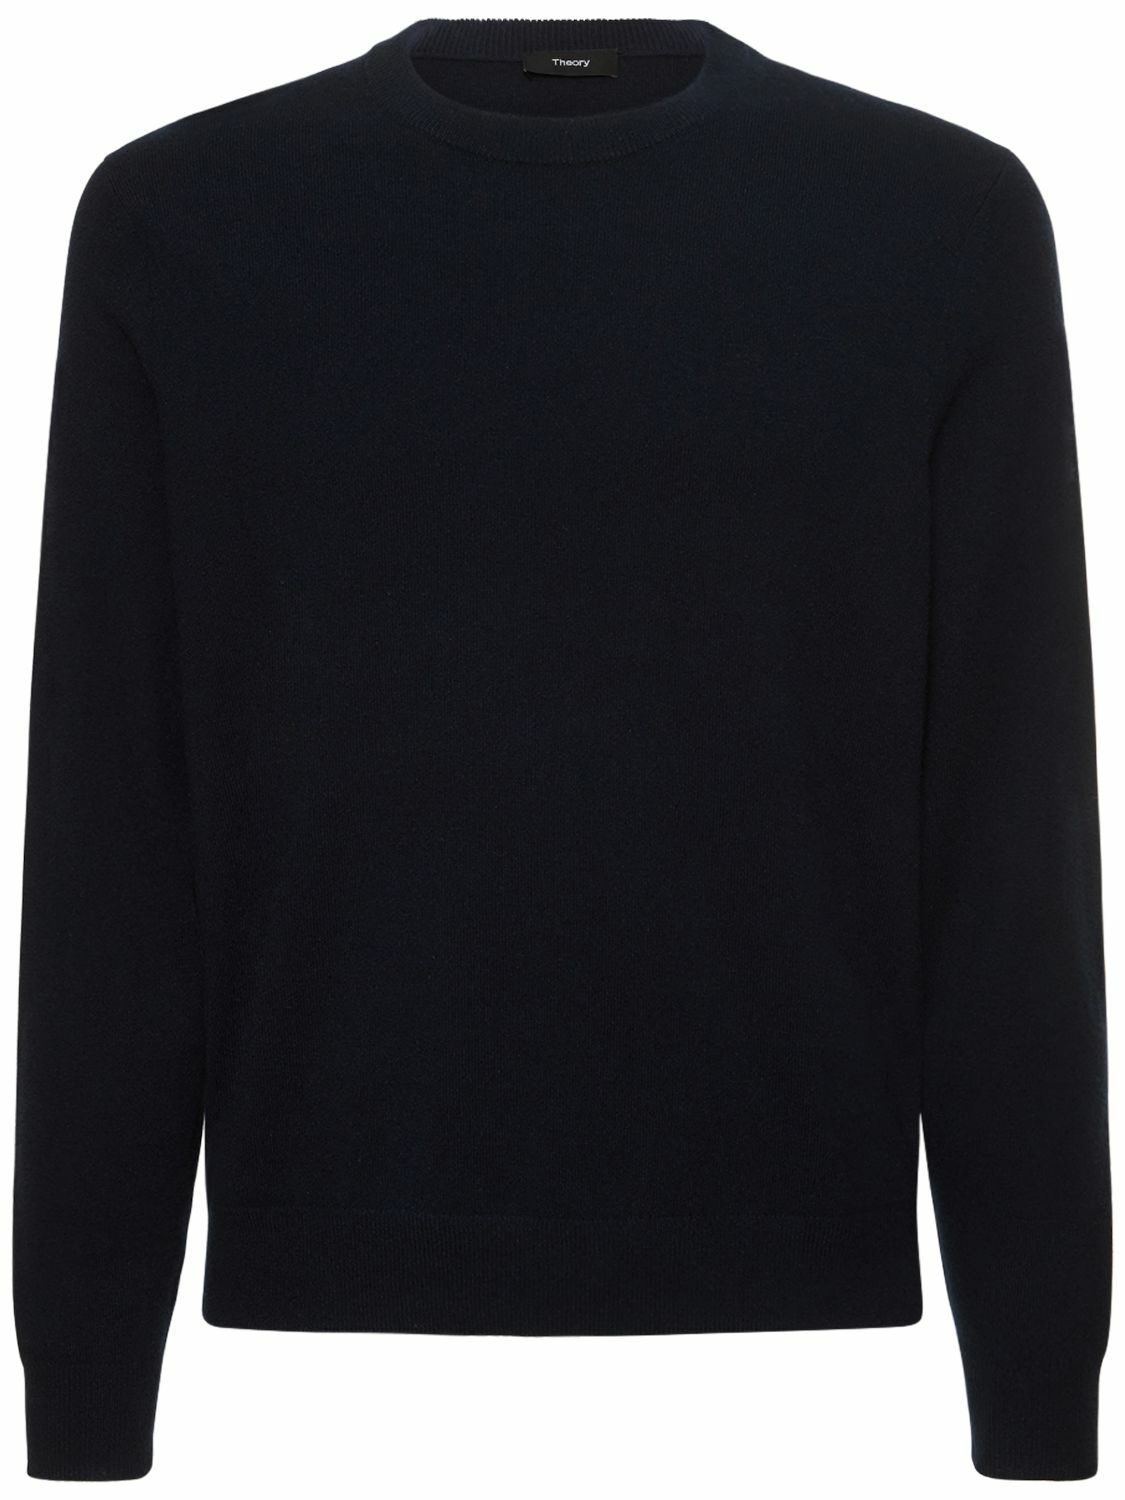 Photo: THEORY - Hilles Cashmere Knit Crewneck Sweater